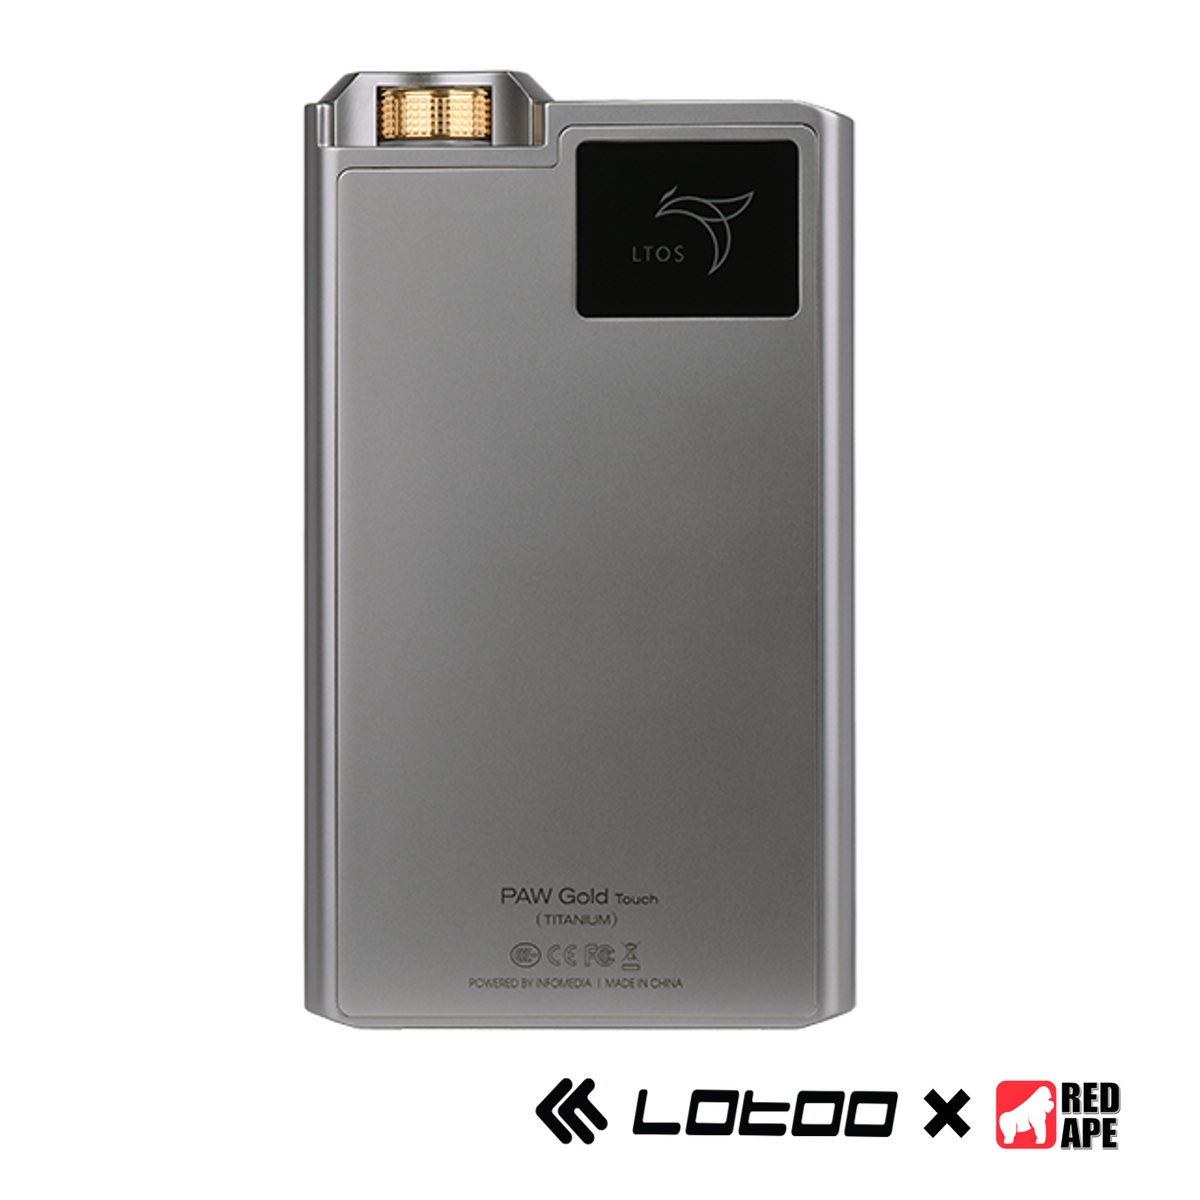 Lotoo PAW Gold Touch Ultimate High Resolution Premium Player 